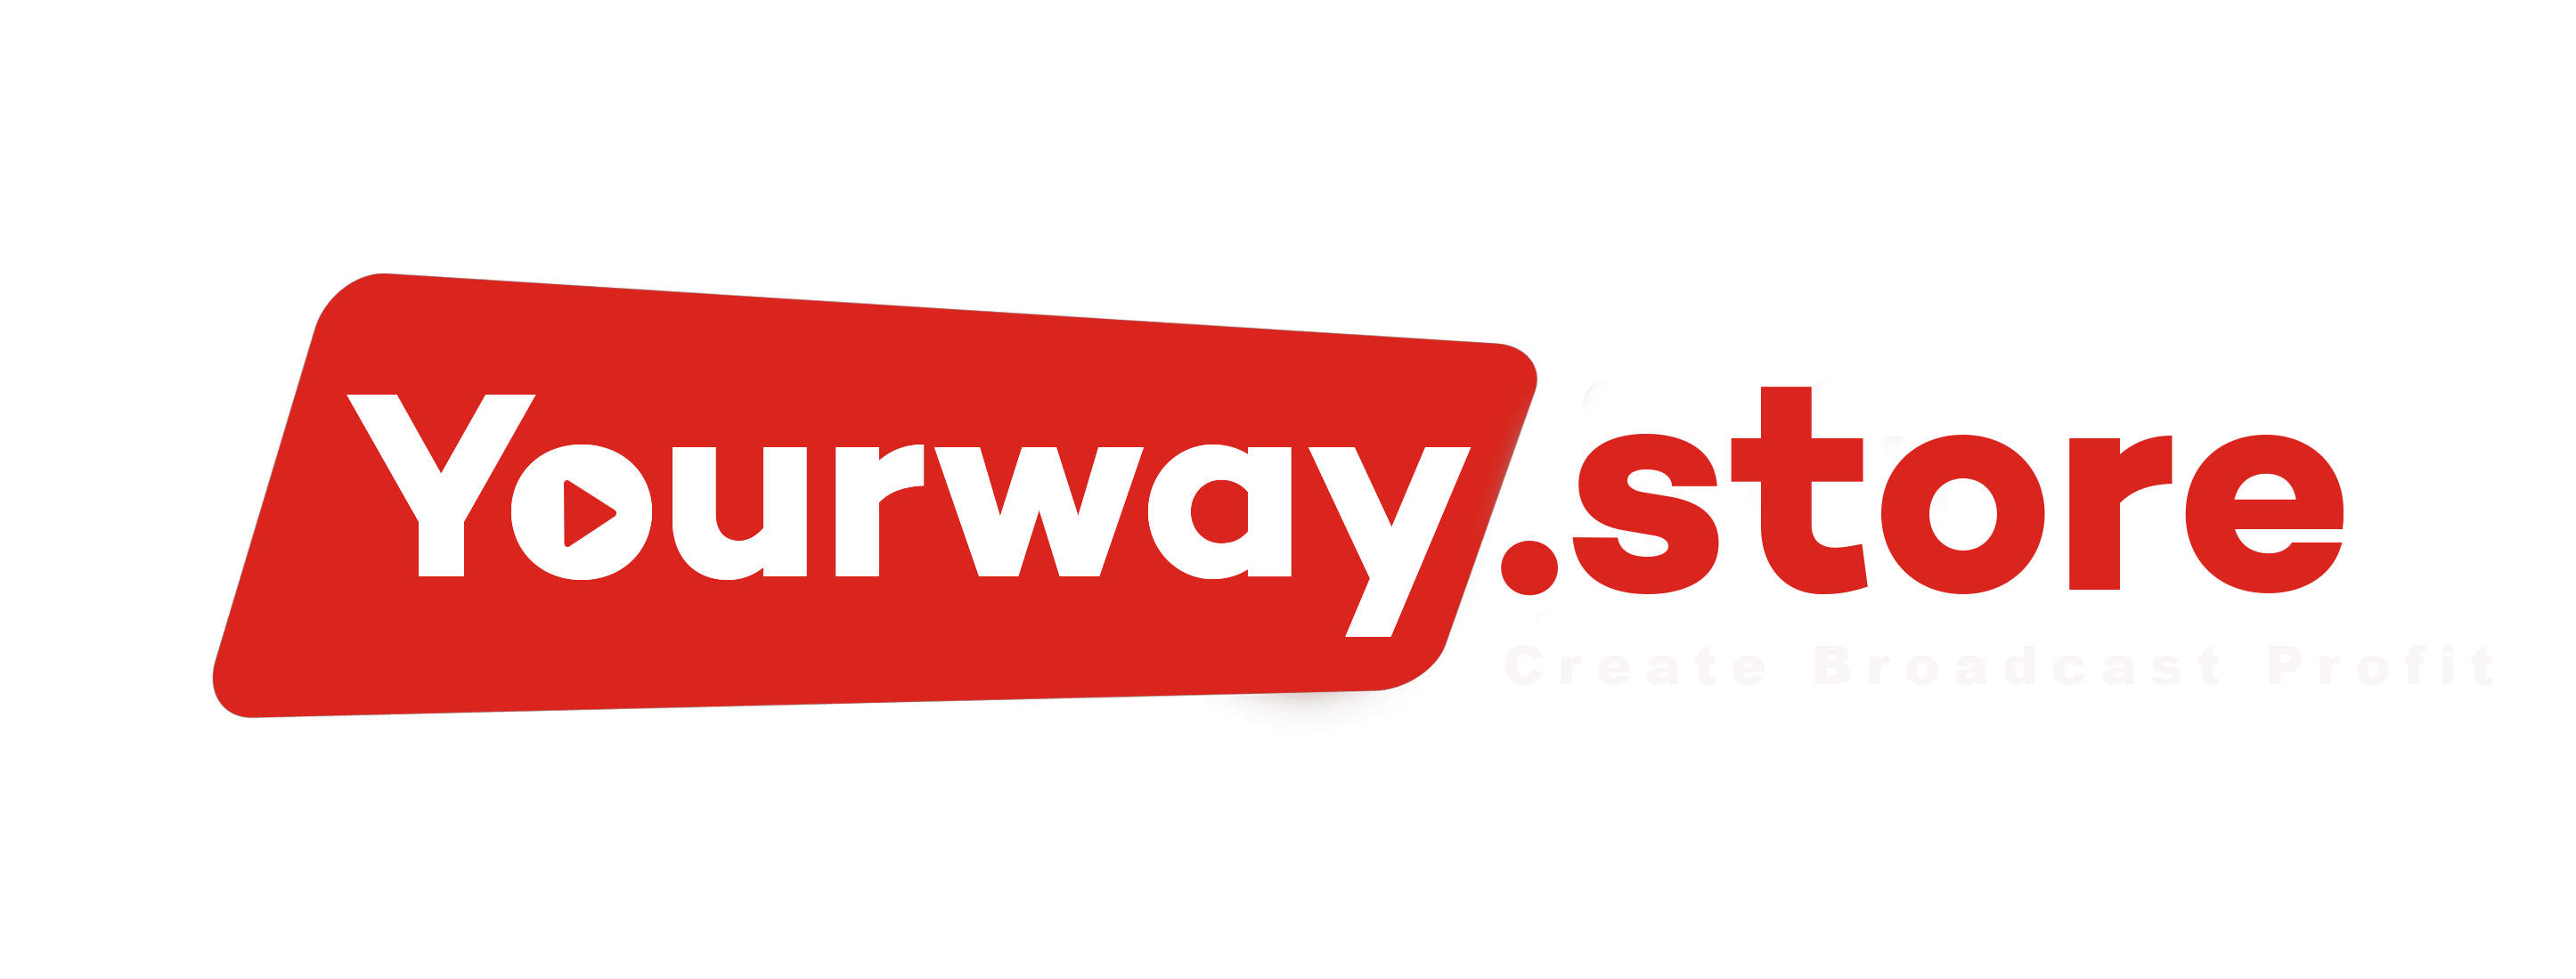 YourWay.Store: Elevate Your Content with Live Streaming & SEO Excellence